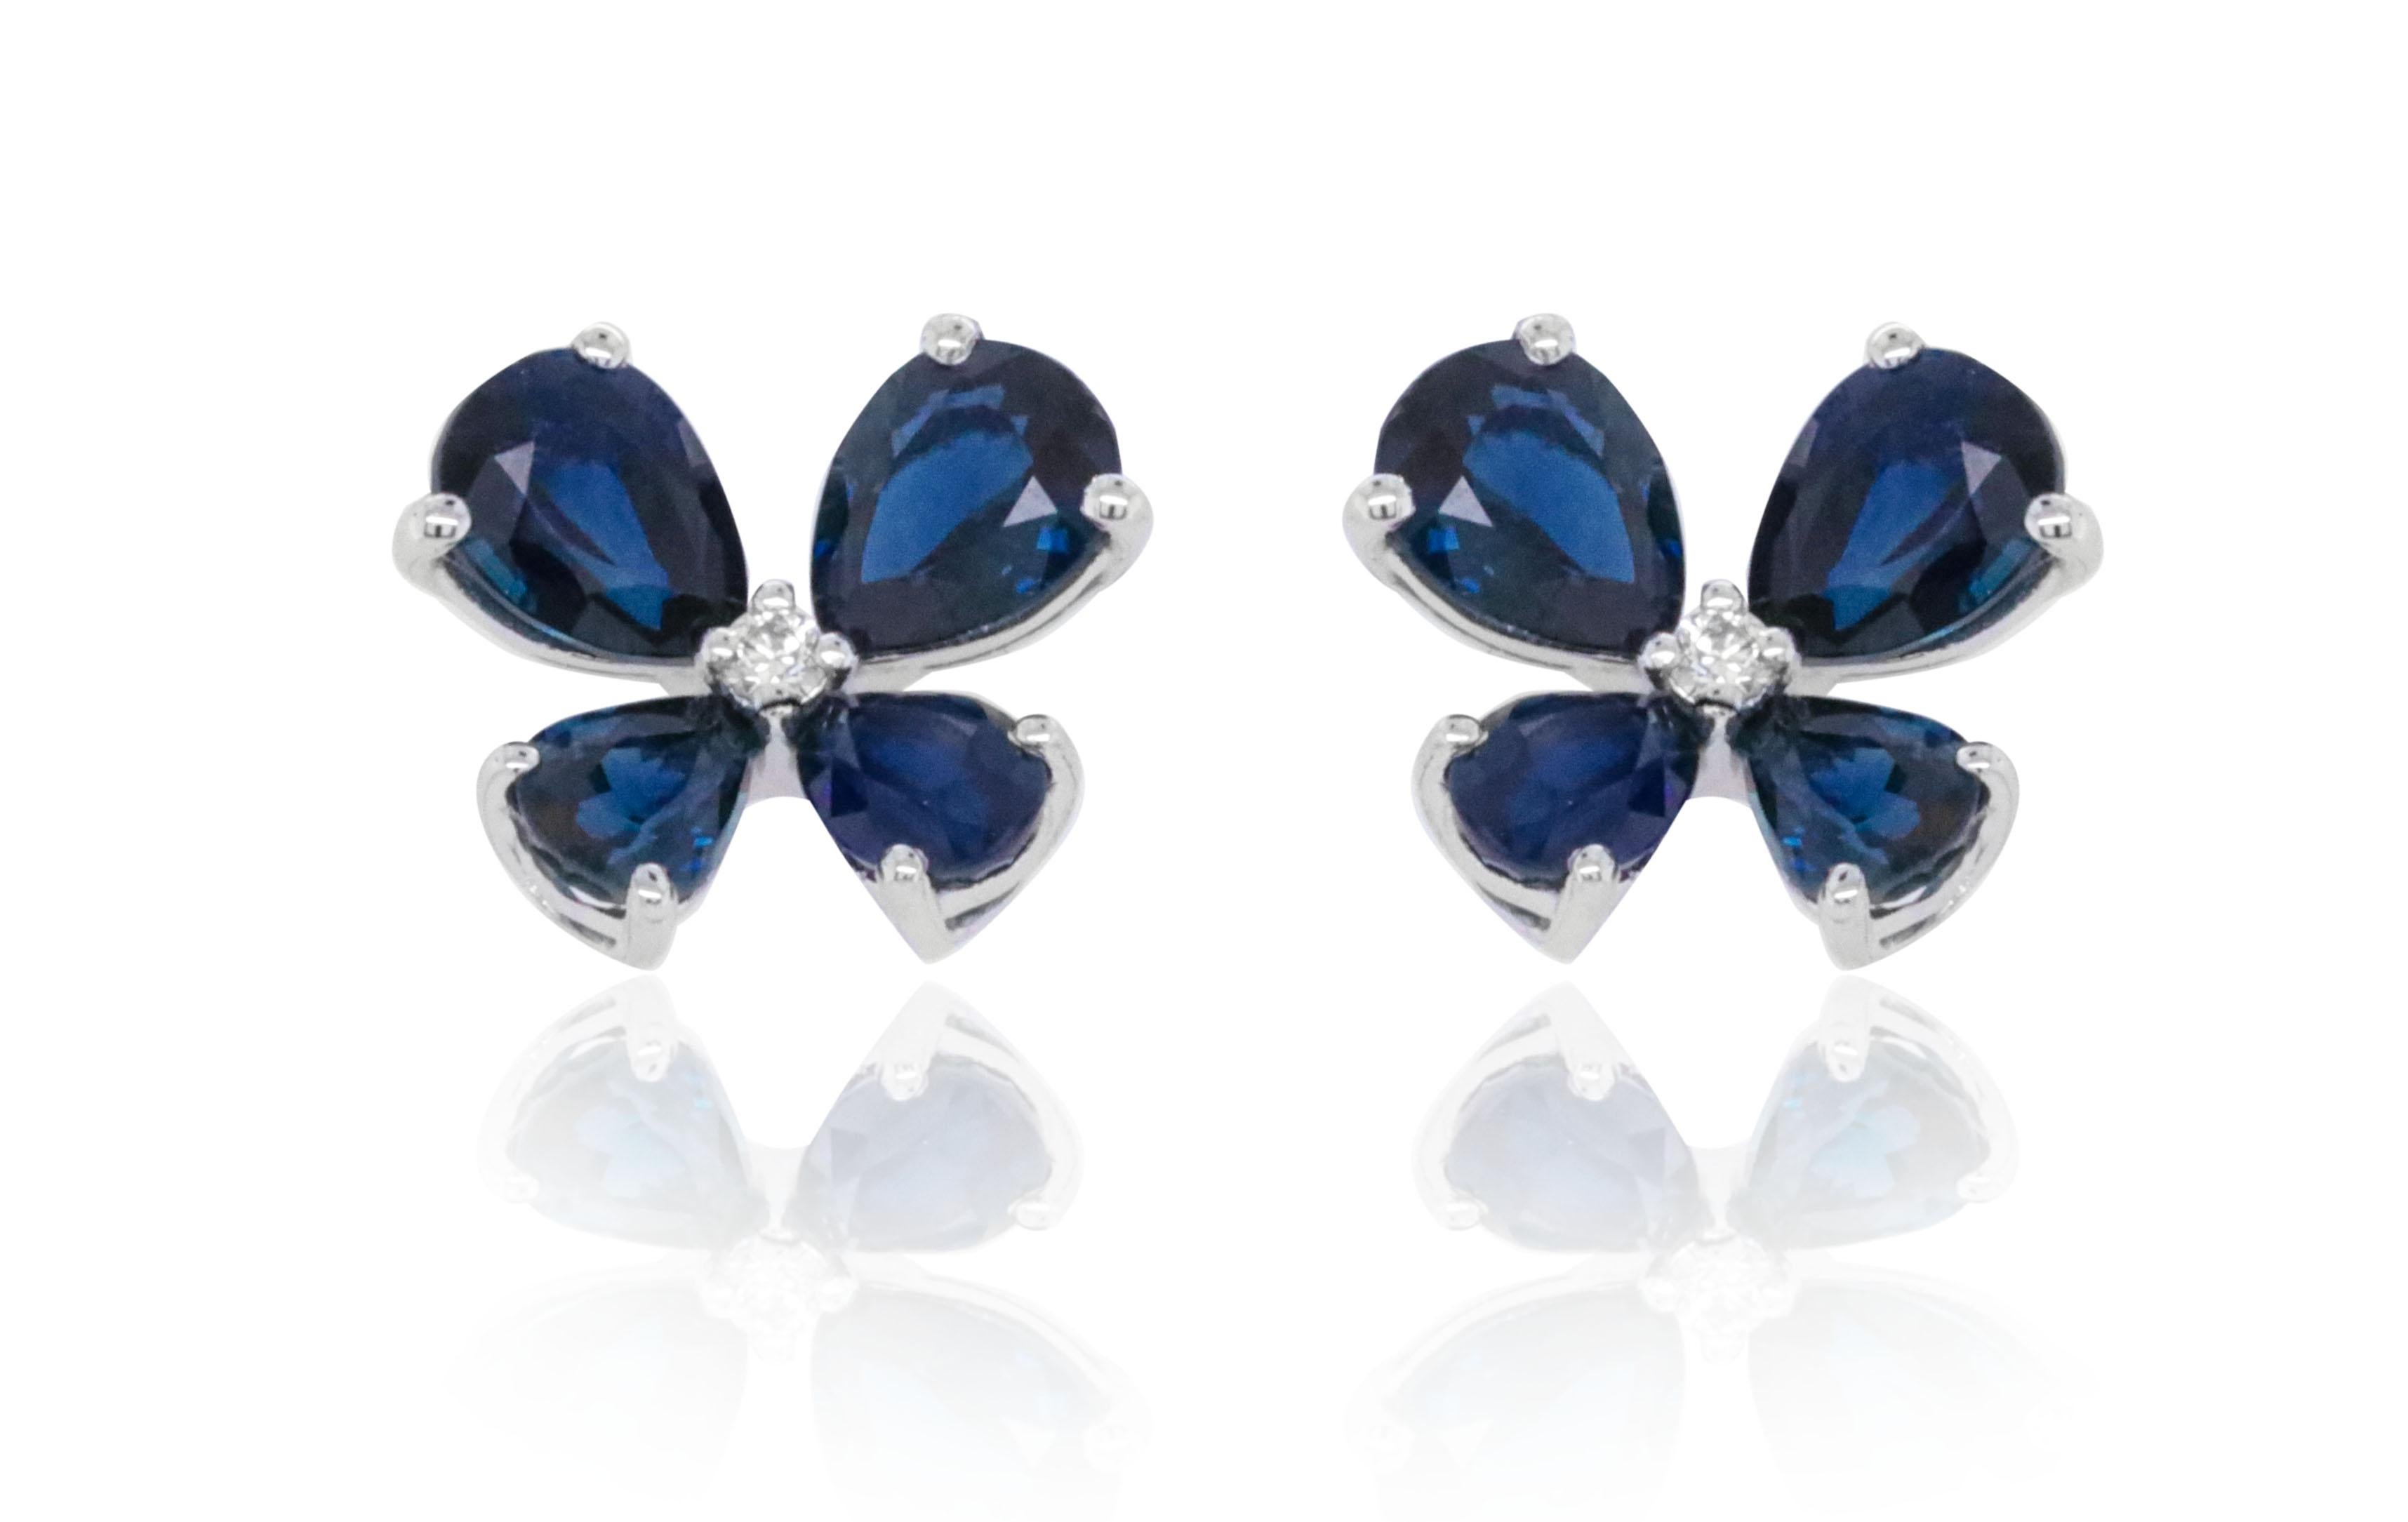 14K White Gold Sapphire And Diamond Earrings featuring 2.26 Carats T.W. of Sapphires and 0.02 Carat T.W. Diamonds

Underline your look with this sharp 14K White Gold Diamond and Sapphire Earrings. High quality Diamonds and sapphires . This Earrings